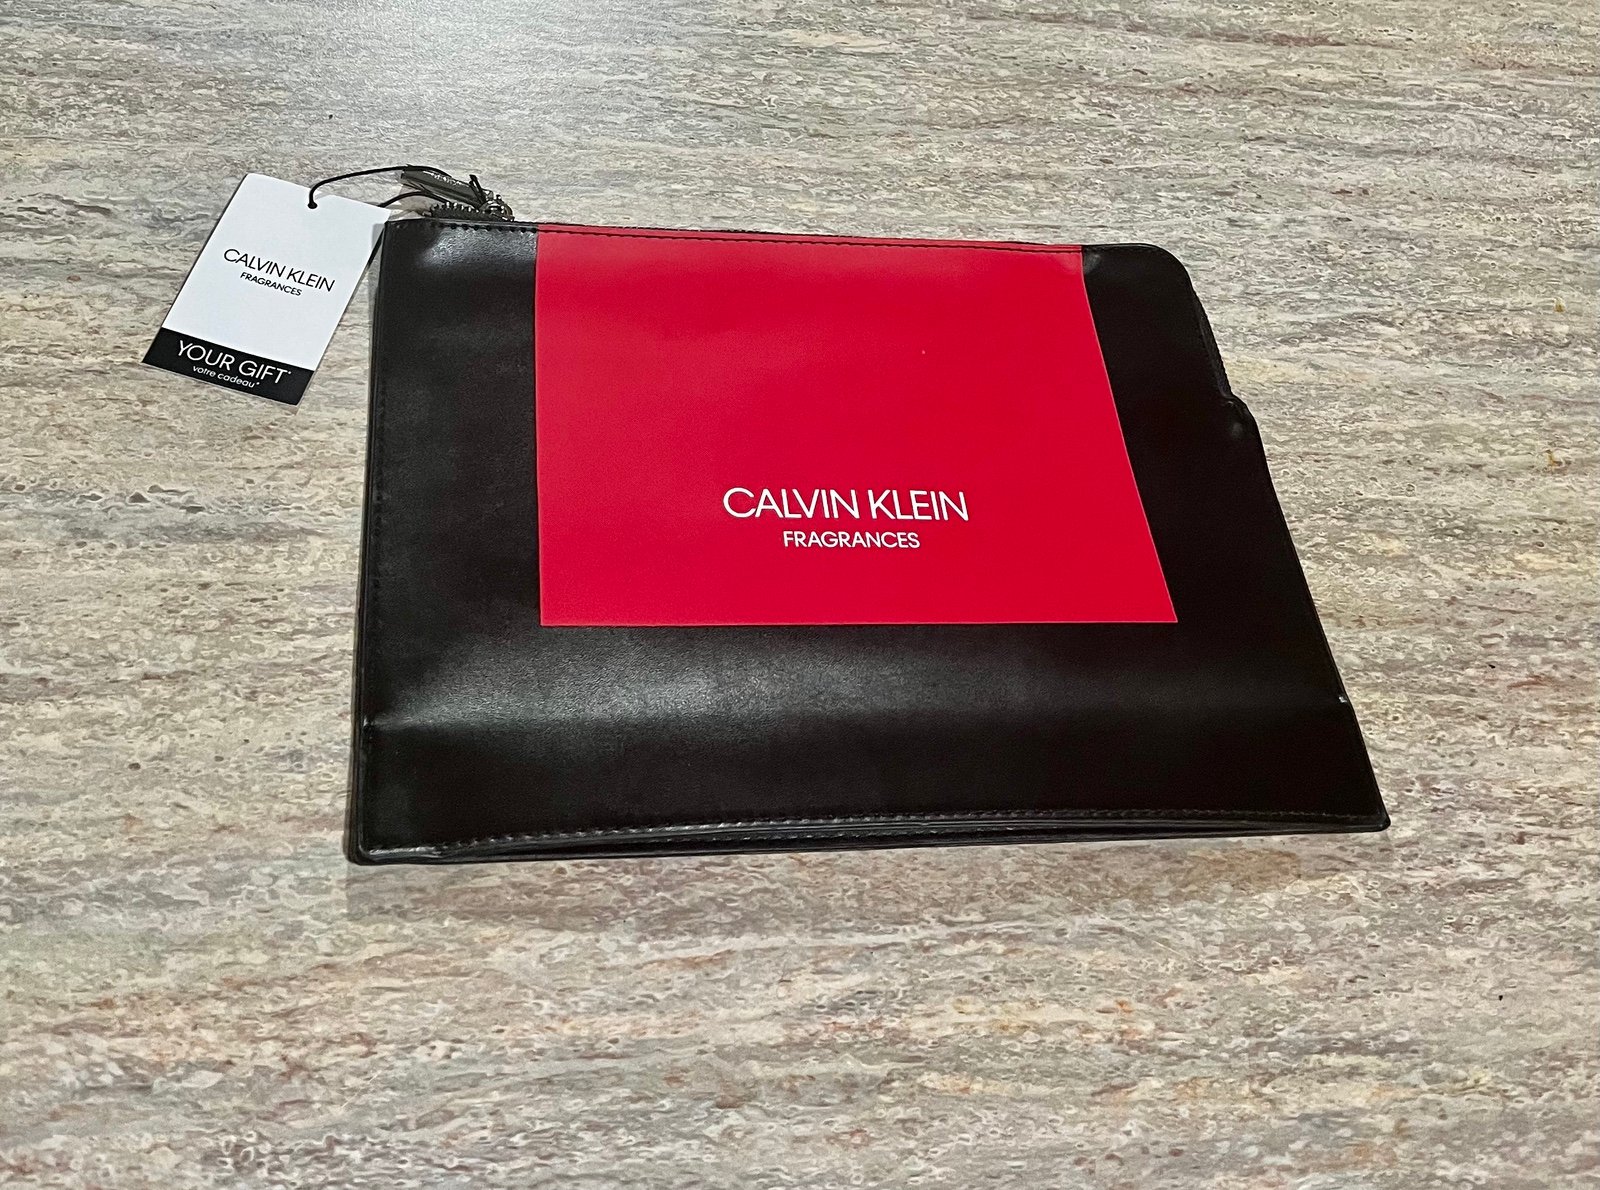 NWT Calvin Klein fragrance black and red clutch 44IP9GB